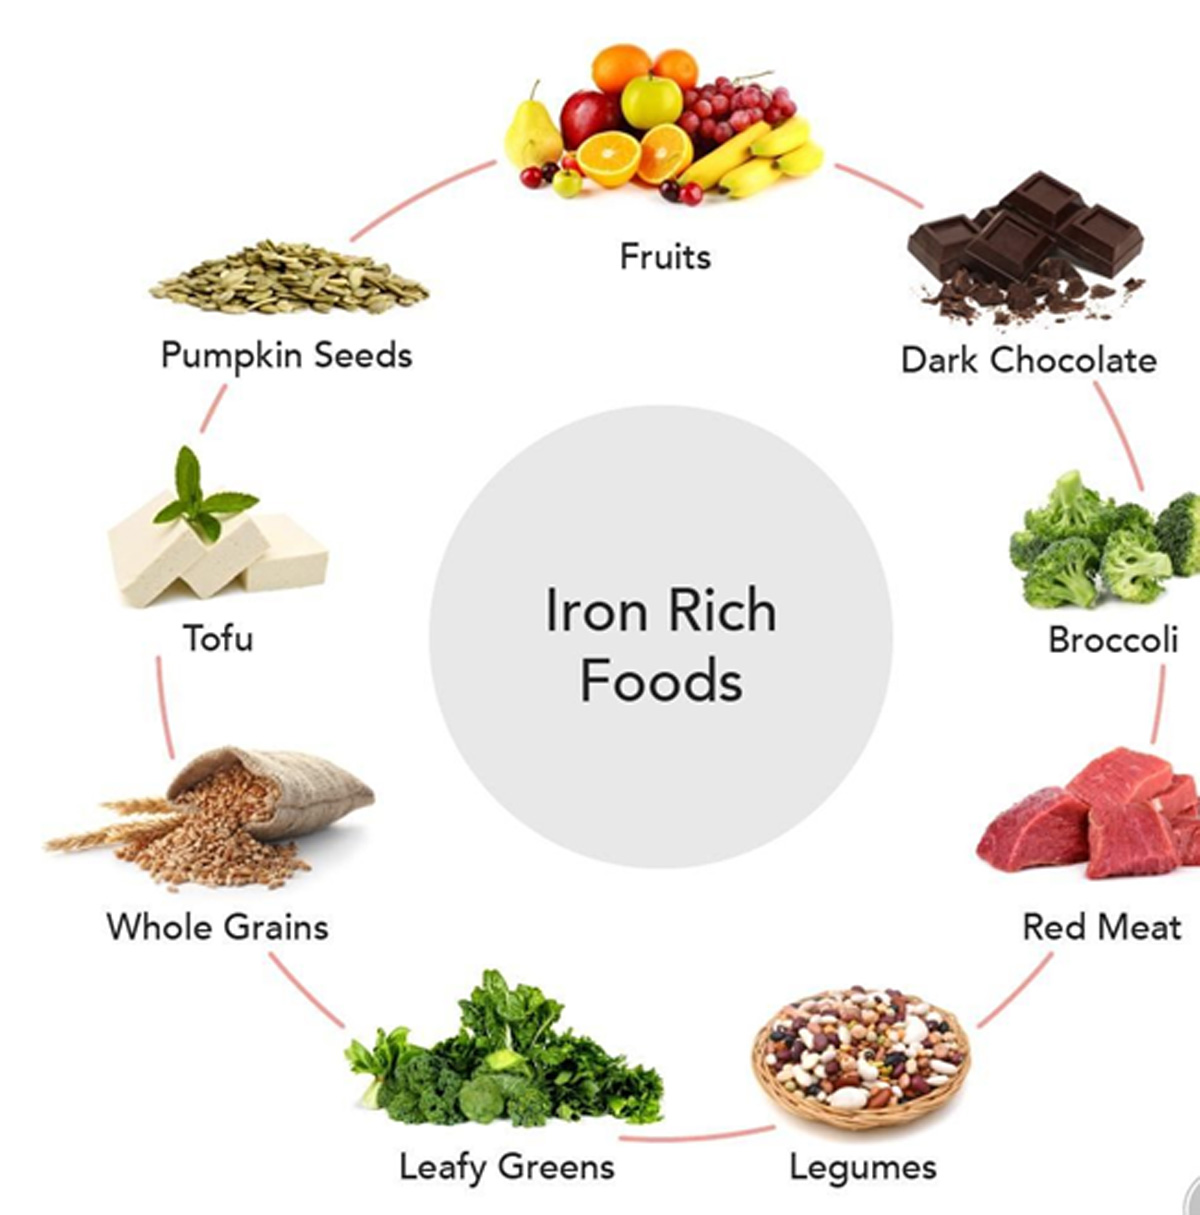 Treatment of iron deficiency anaemia